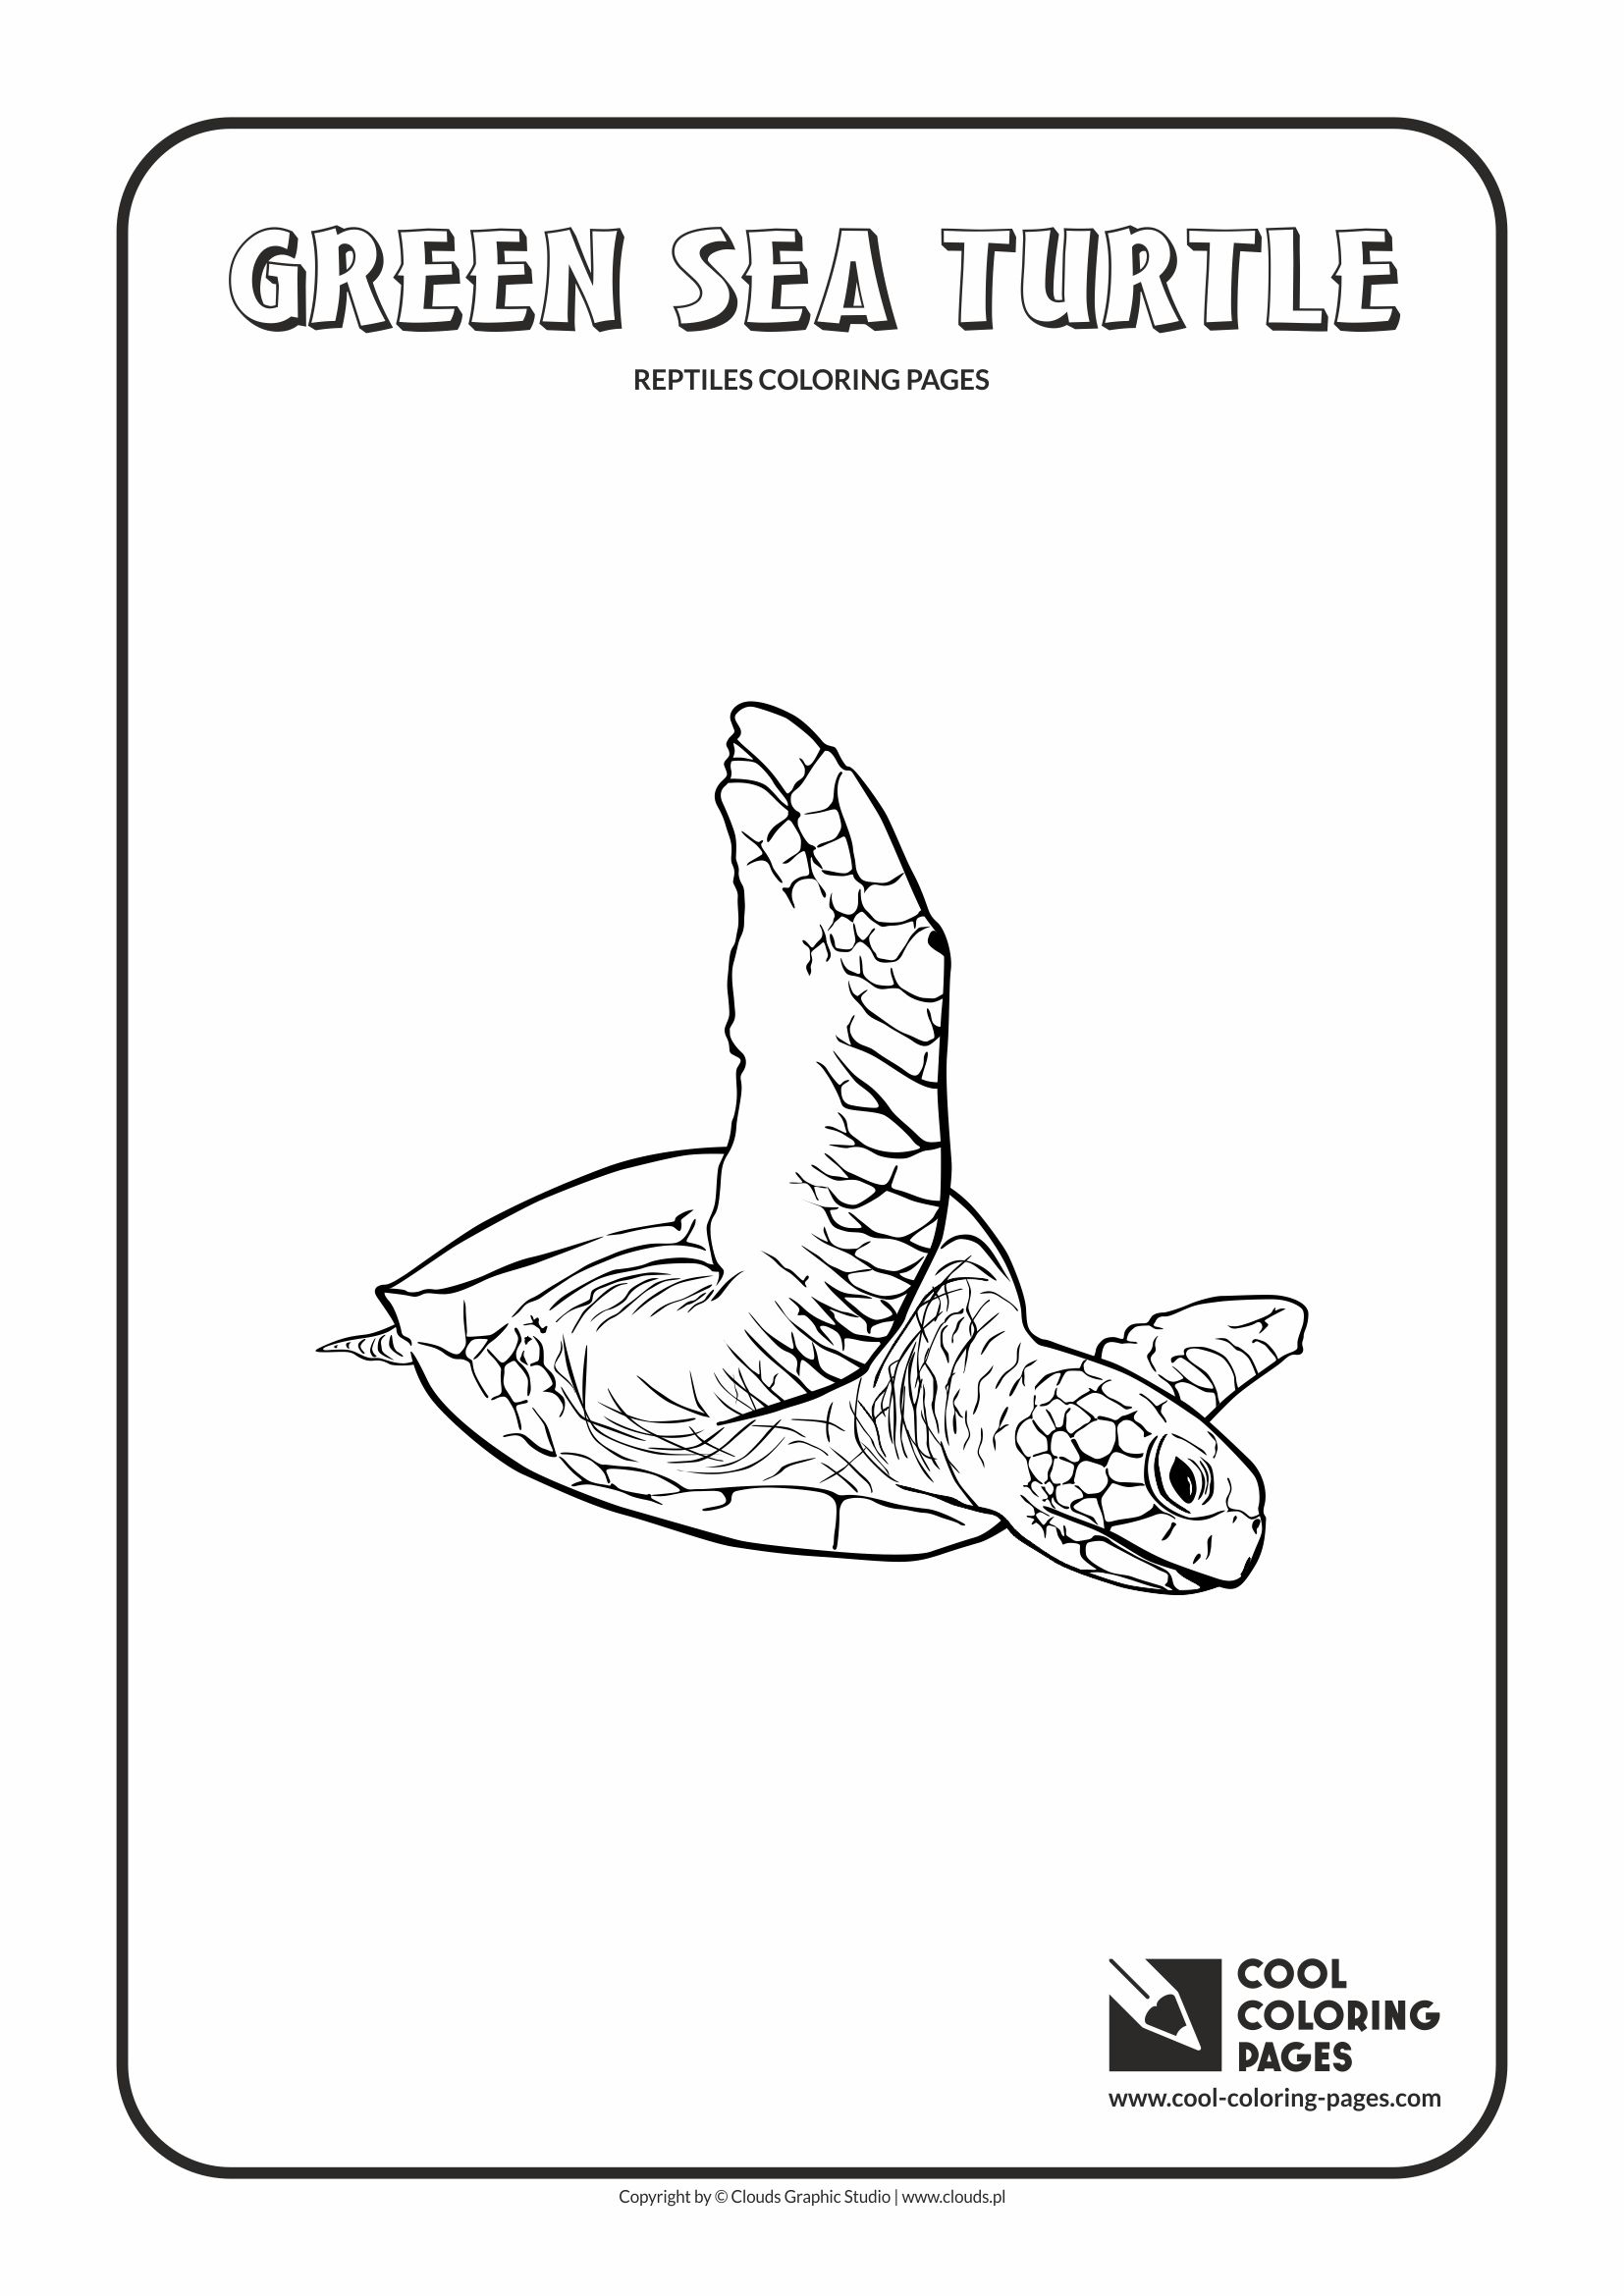 Cool Coloring Pages - Animals / Green sea turtle / Coloring page with green sea turtle